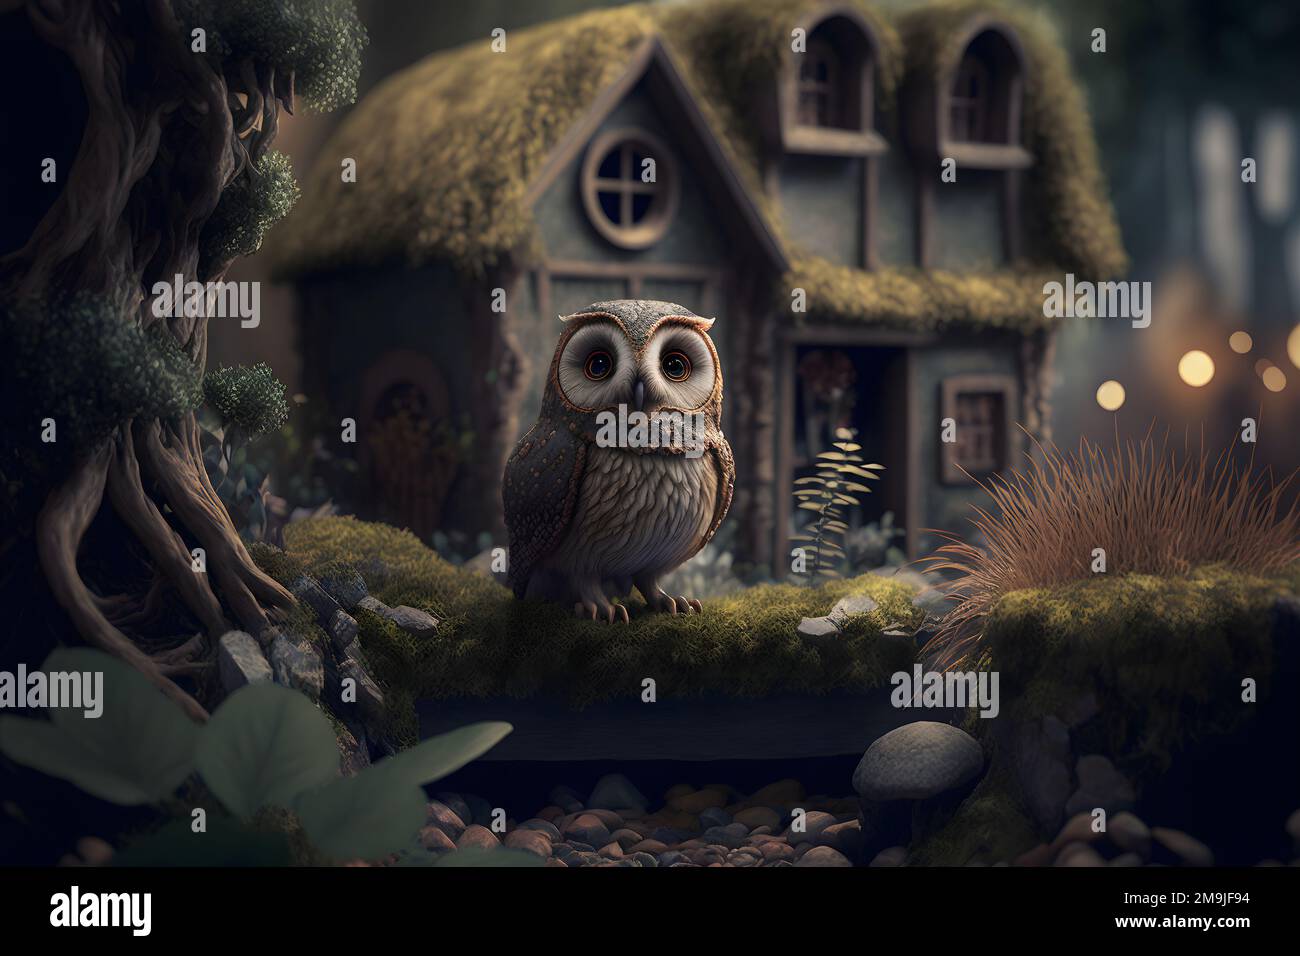 Owl guards fairy tale house in forest, the home of hobbits and forest elves. Light in the windows of the hut, owl close-up on the background of a magi Stock Photo